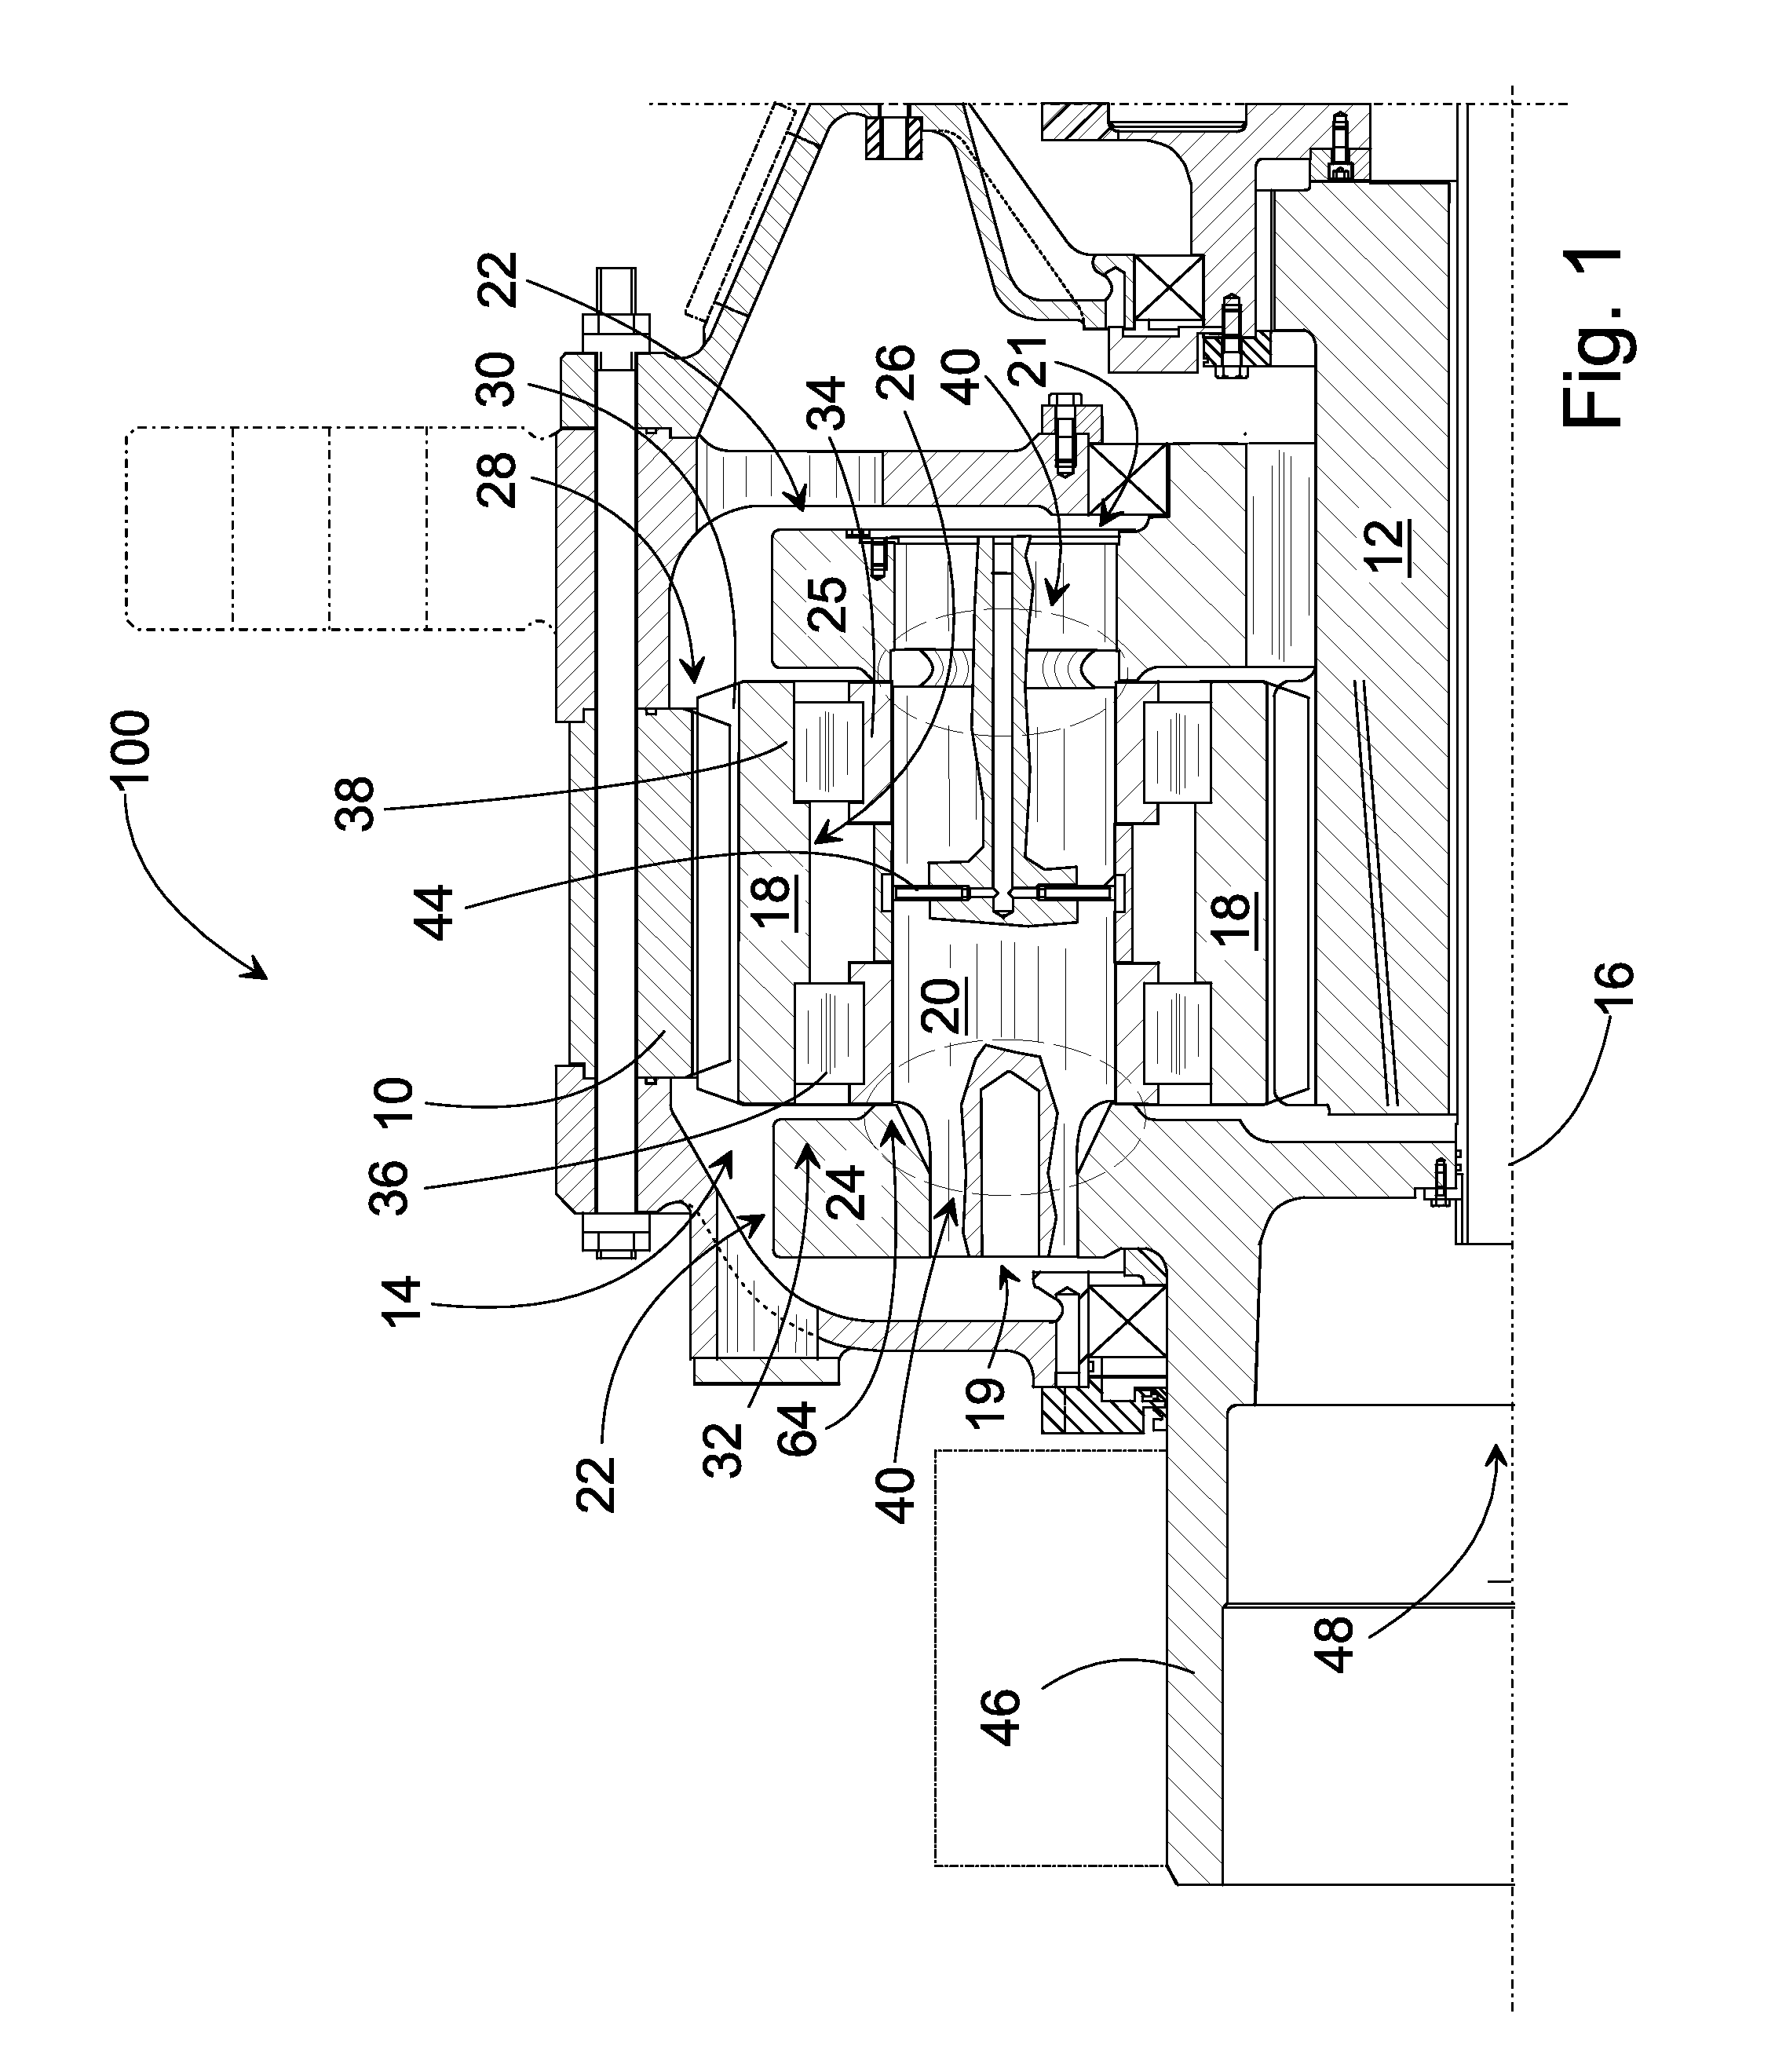 Arrangement in a Planetary Gearing and a Planetary Gear